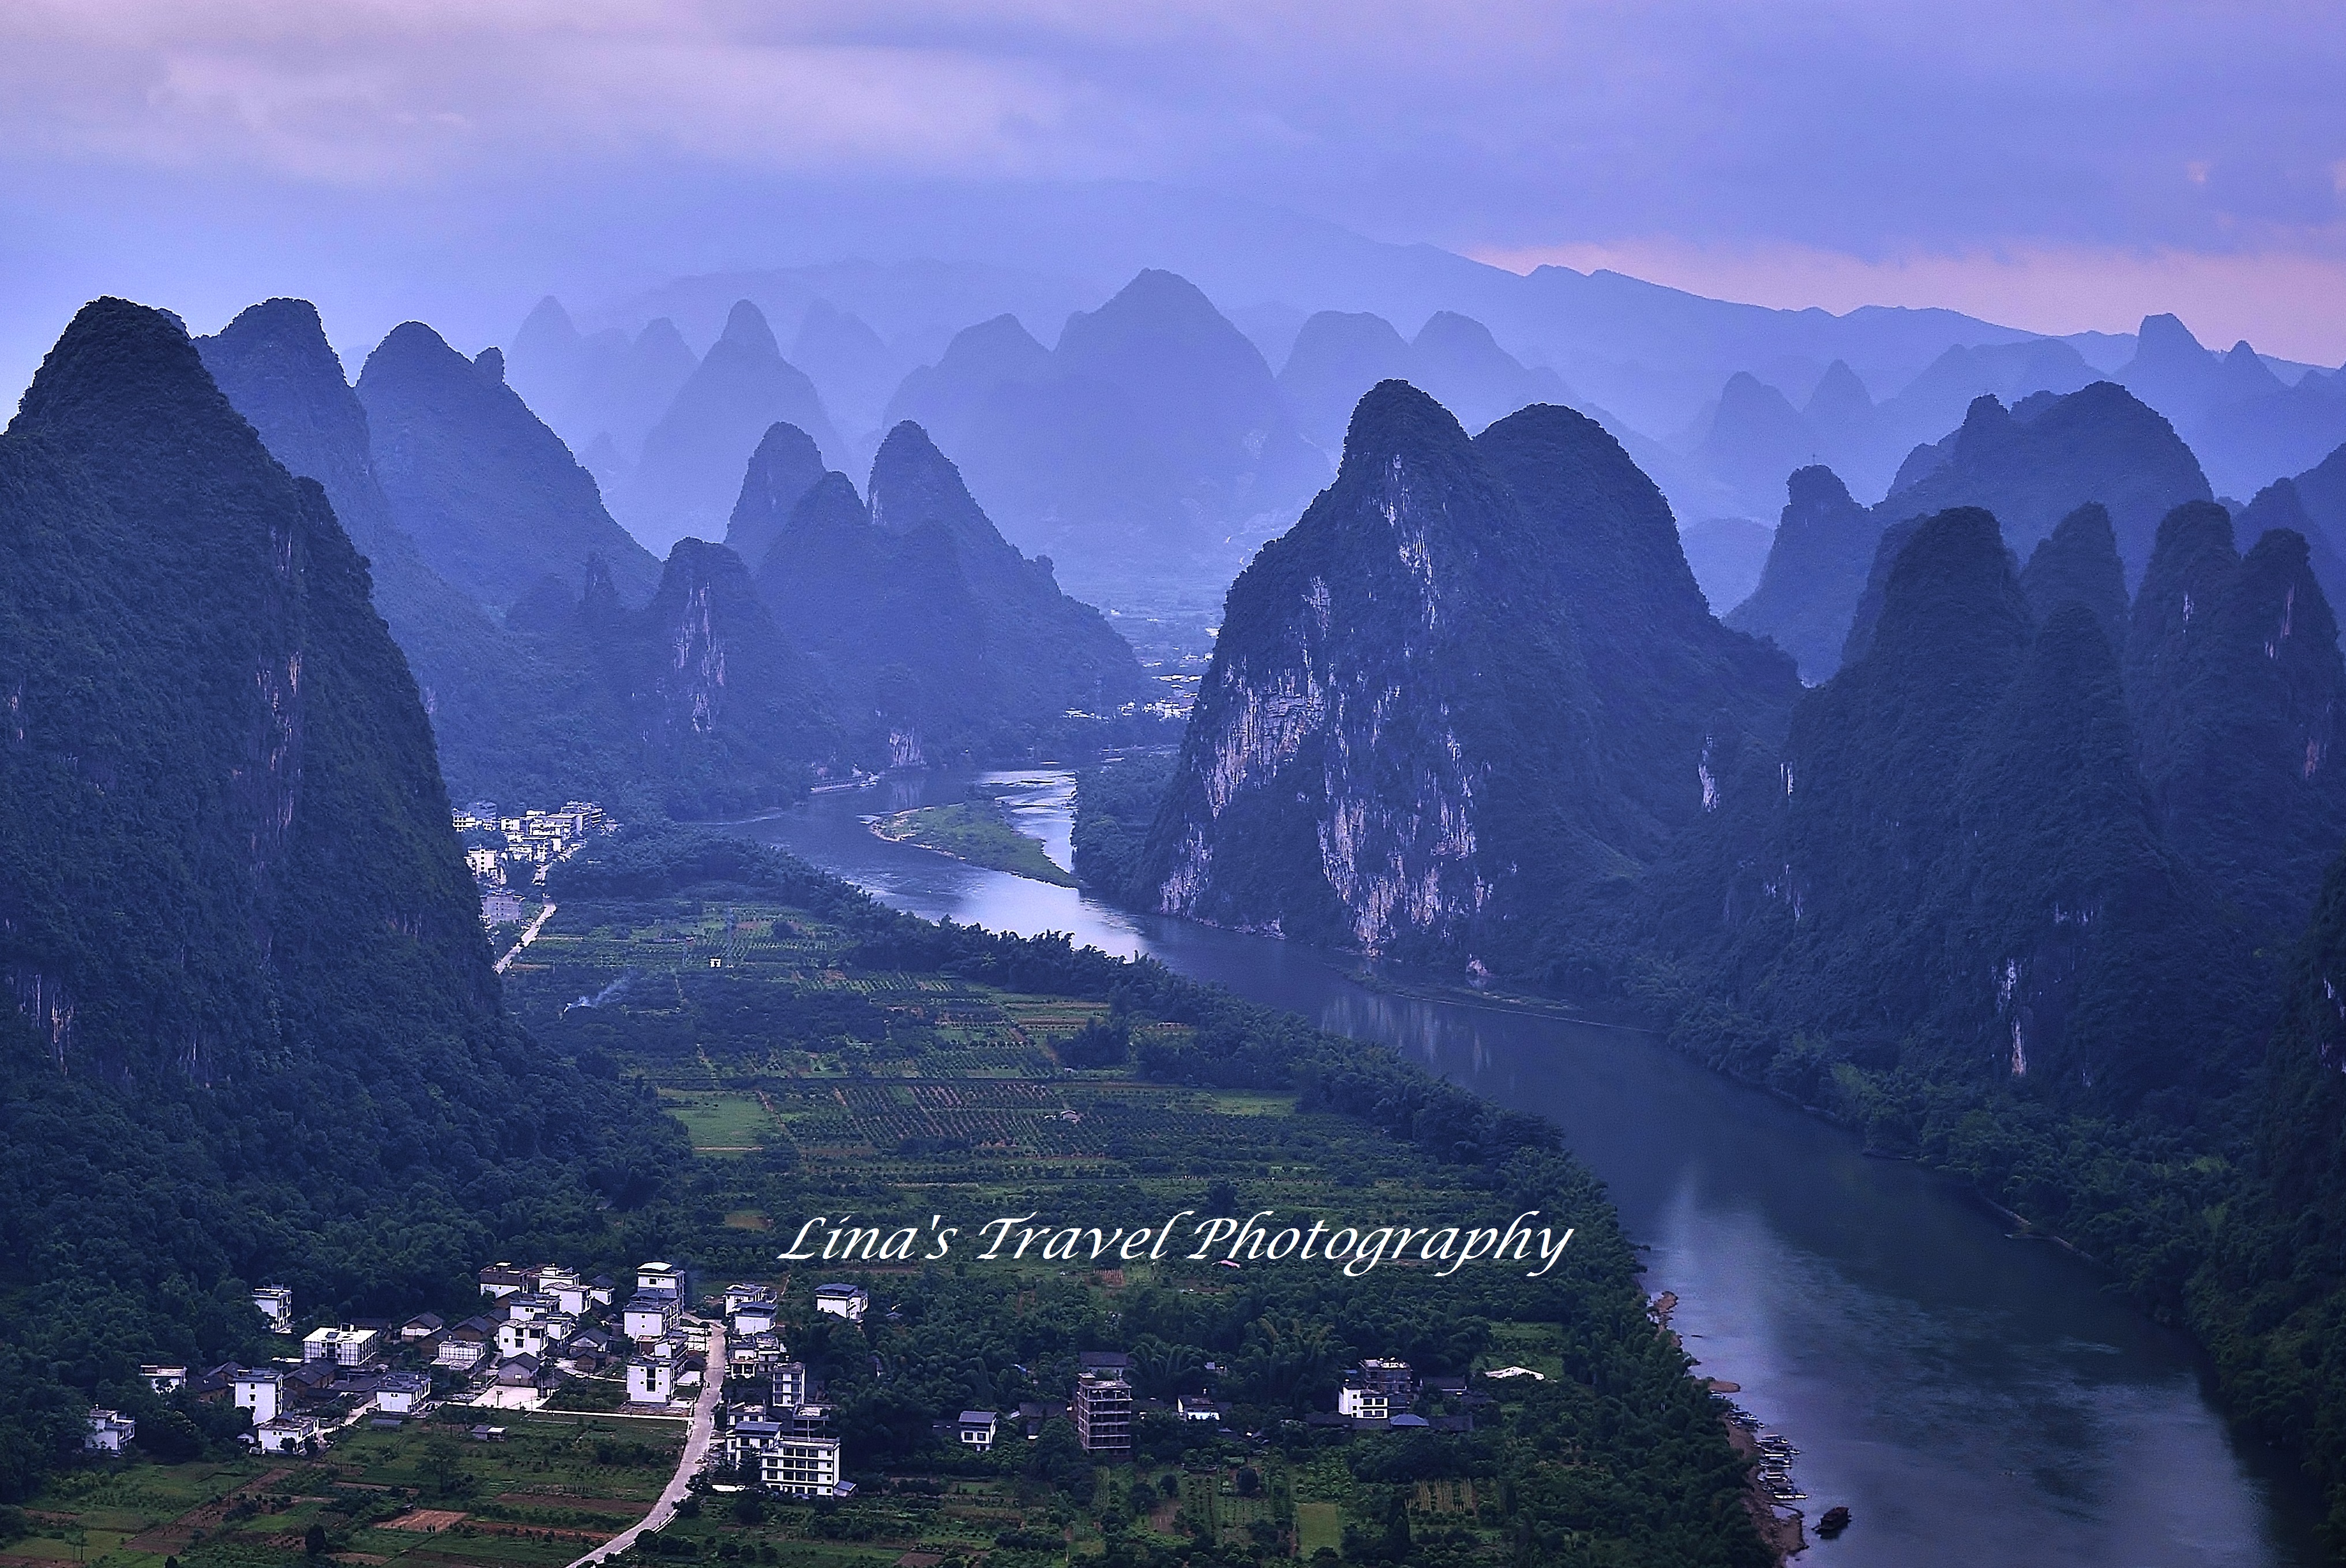 Sunrise over Xianggong Hill surrounded by karst landscape, Yangshuo, Guangxi, China